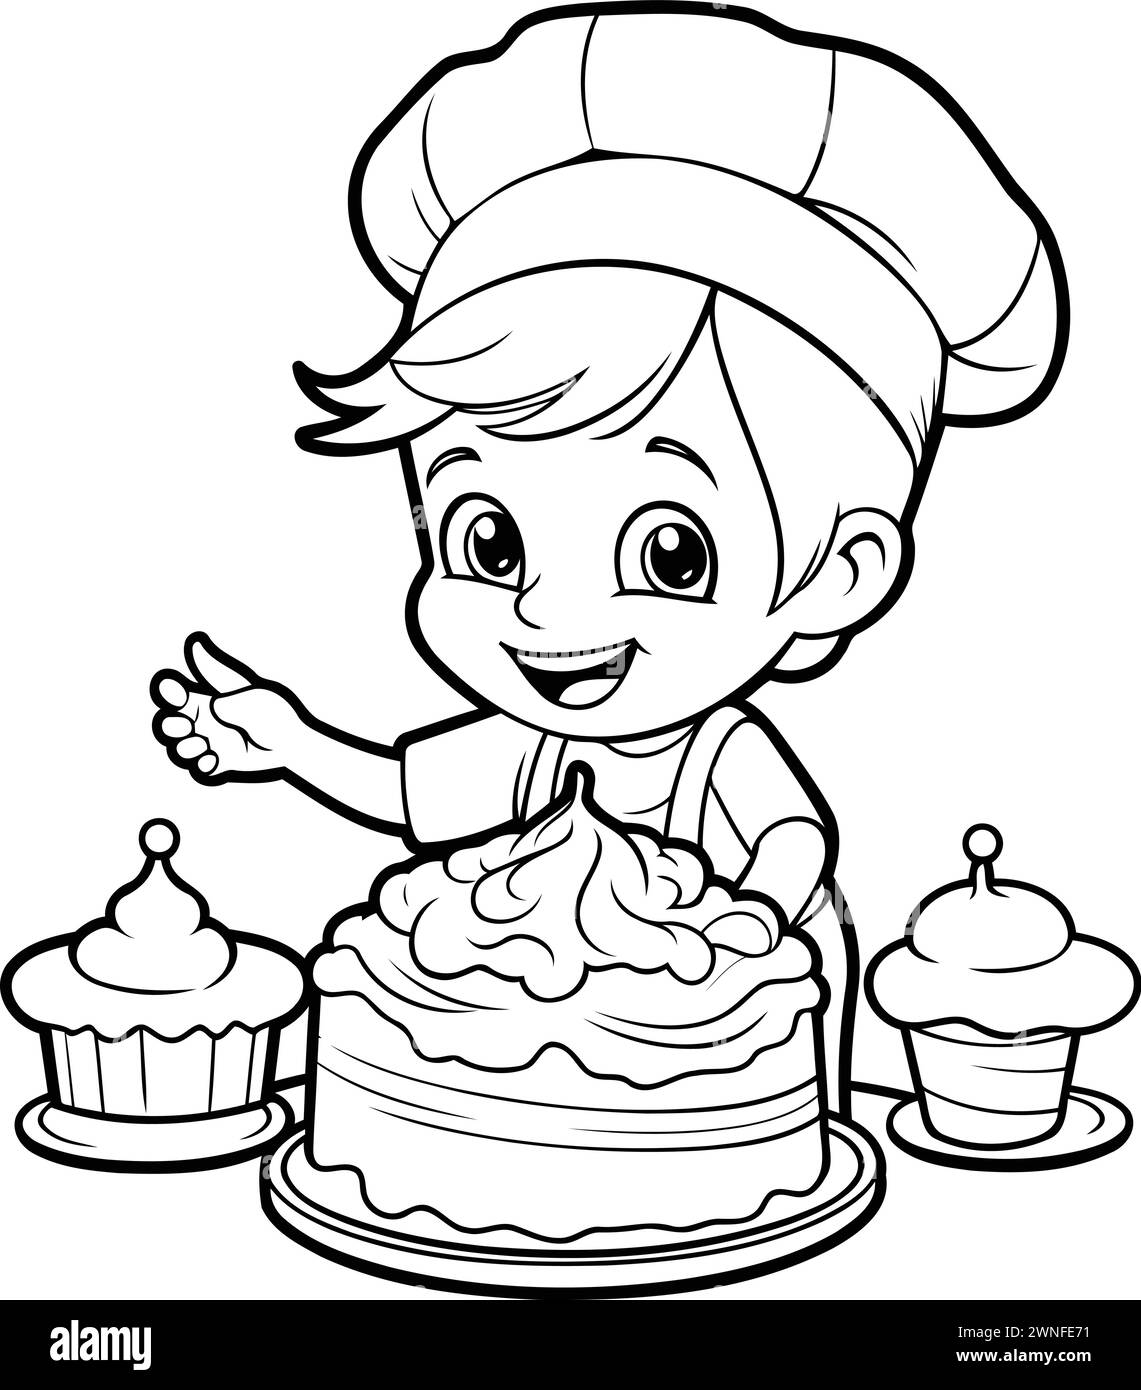 Black and White Cartoon Illustration of Little Boy Chef with Cake for Coloring Book Stock Vector